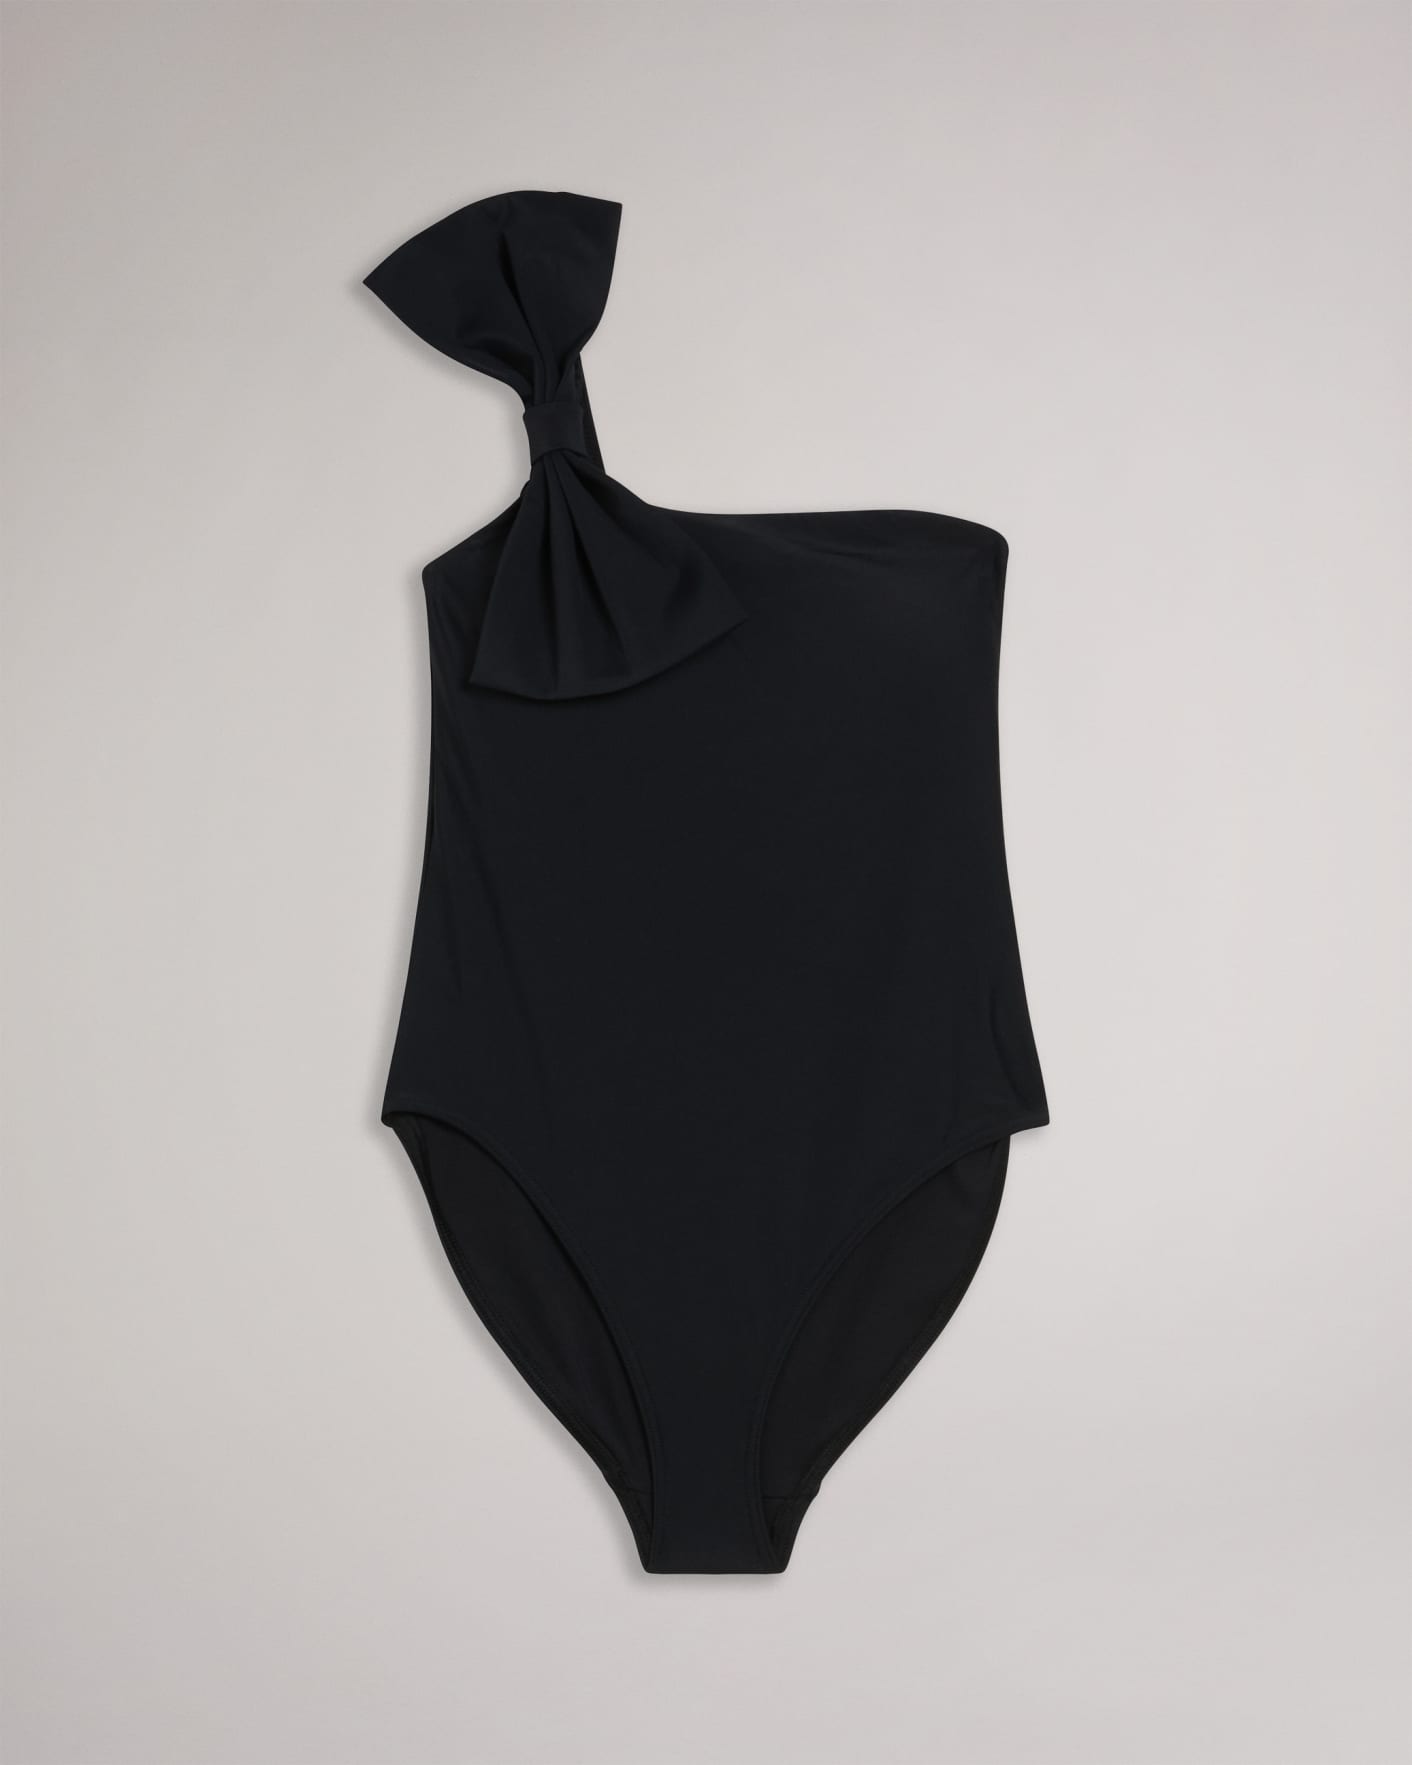 SARALEY - BLACK, Swimsuits